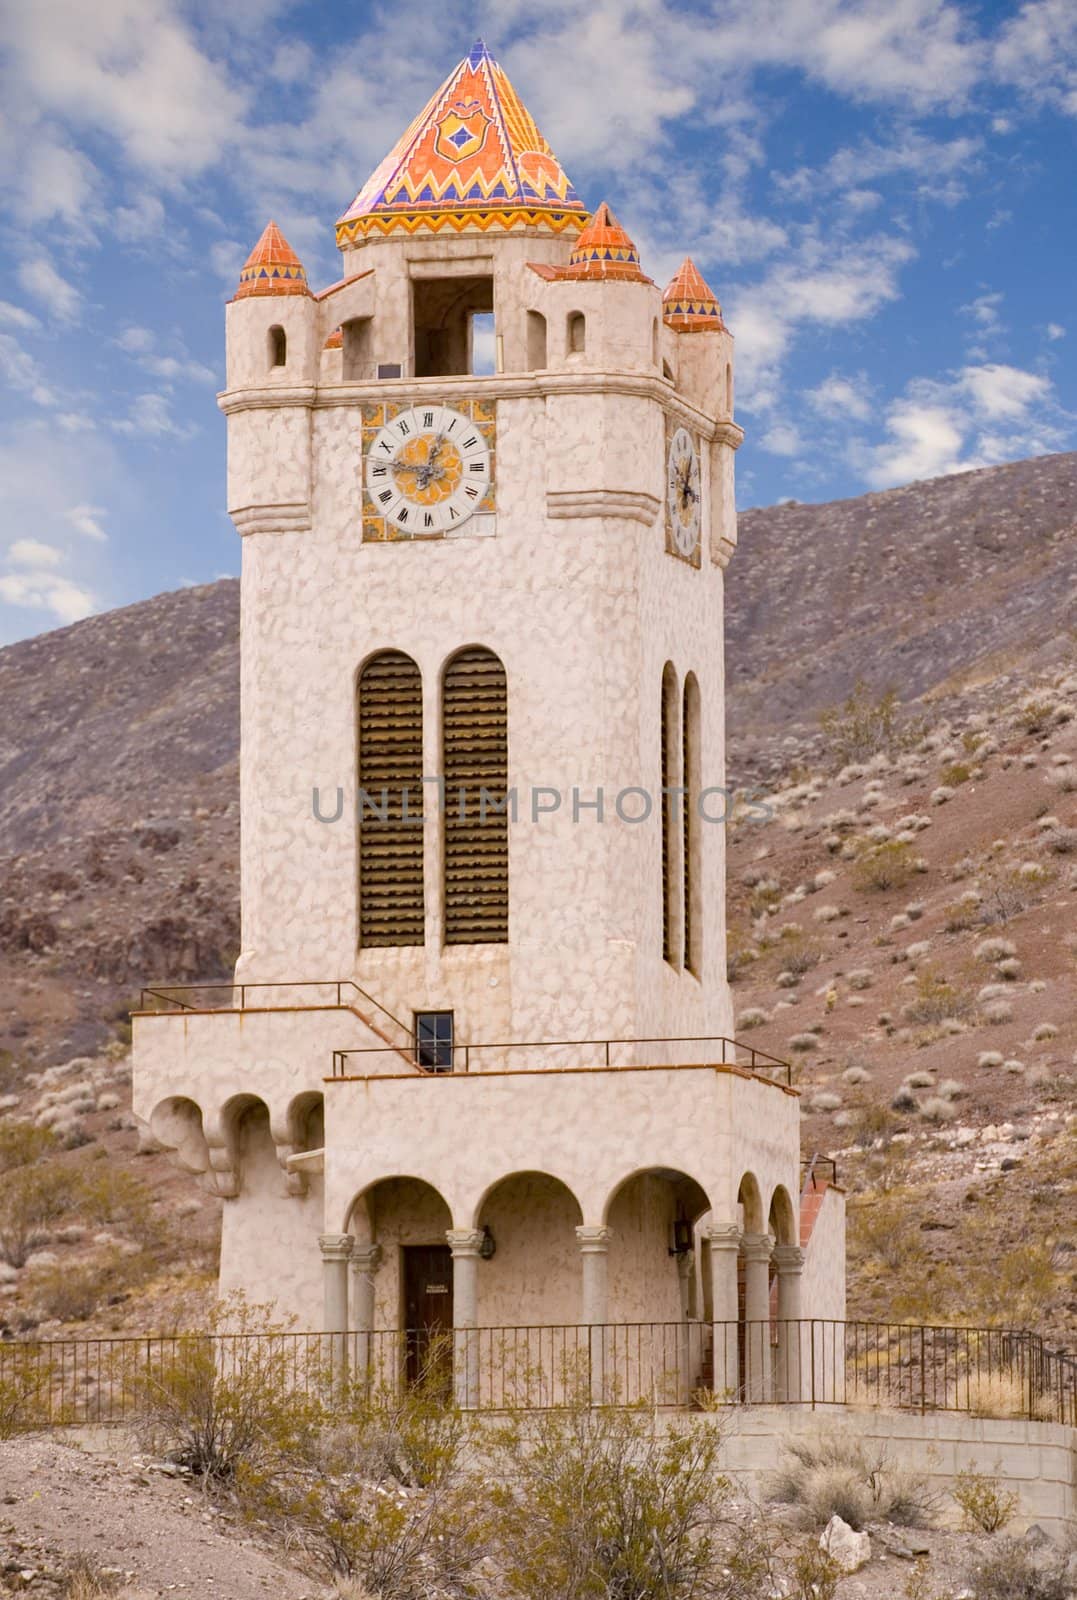 Scotty's Castle in Death valley in the mountains with clouds overhead